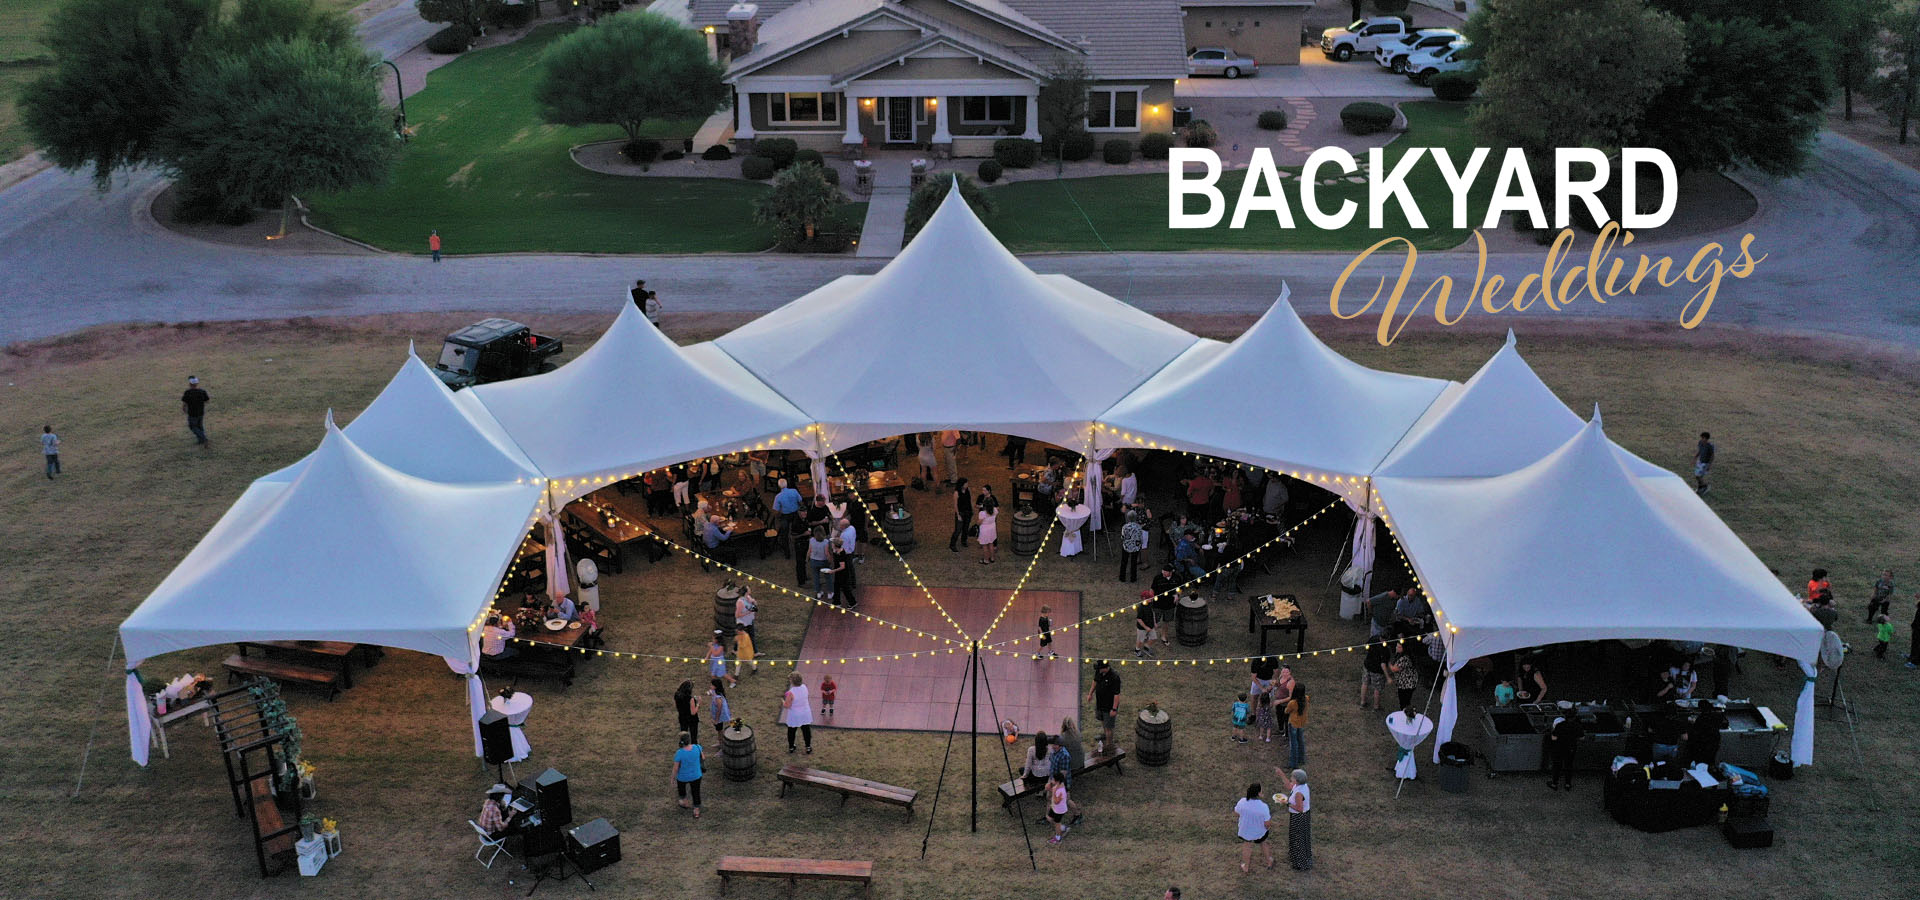 Full backyard wedding rental package with a large tent configuration, outdoor lighting, a dance floor, tables, chairs, linens, and party lights.